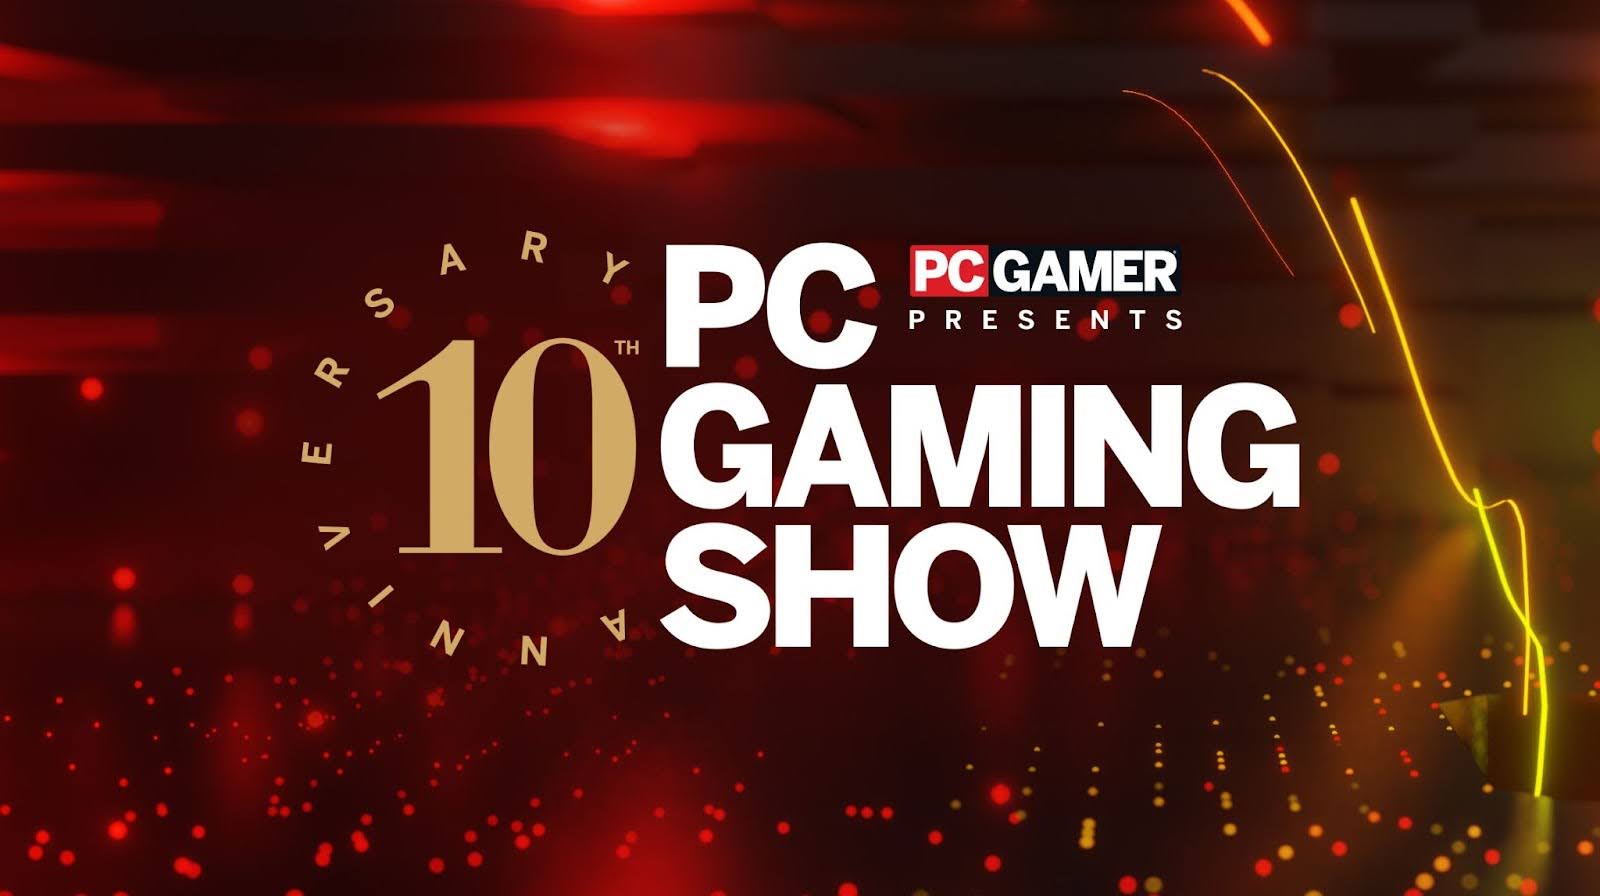  The PC Gaming Show returns June 9 to celebrate its 10-year anniversary and the most exciting new PC games 